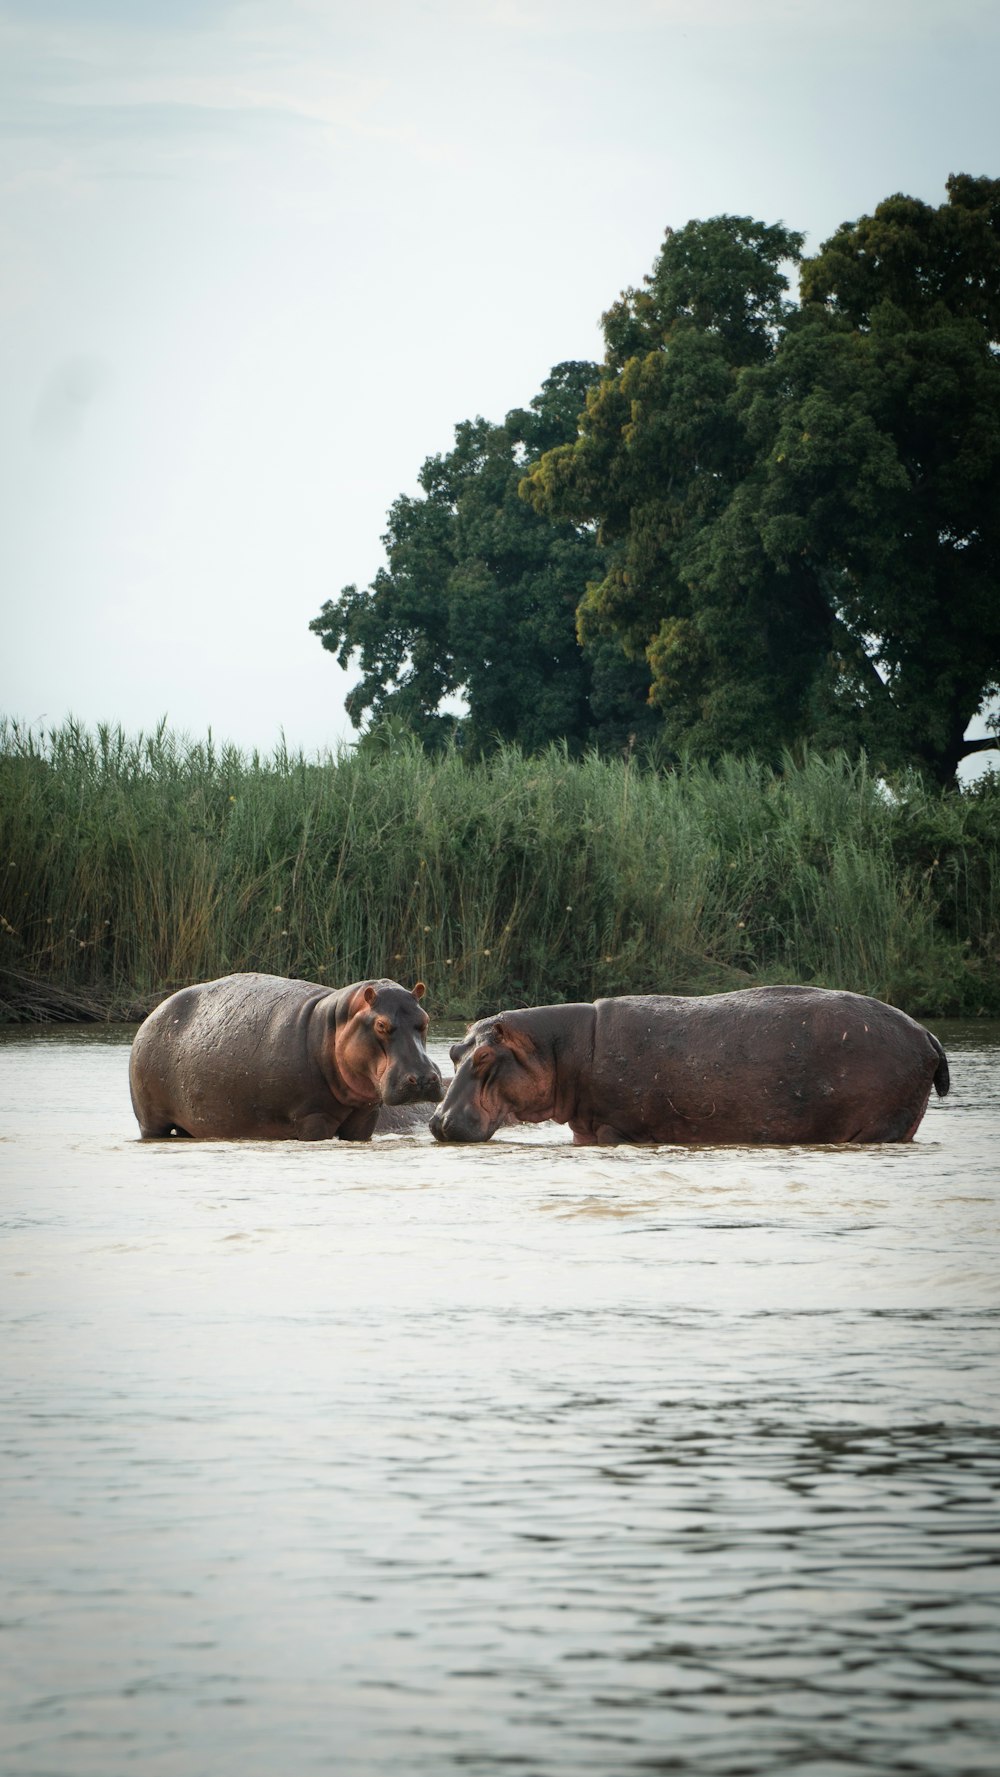 two hippos in a body of water with trees in the background